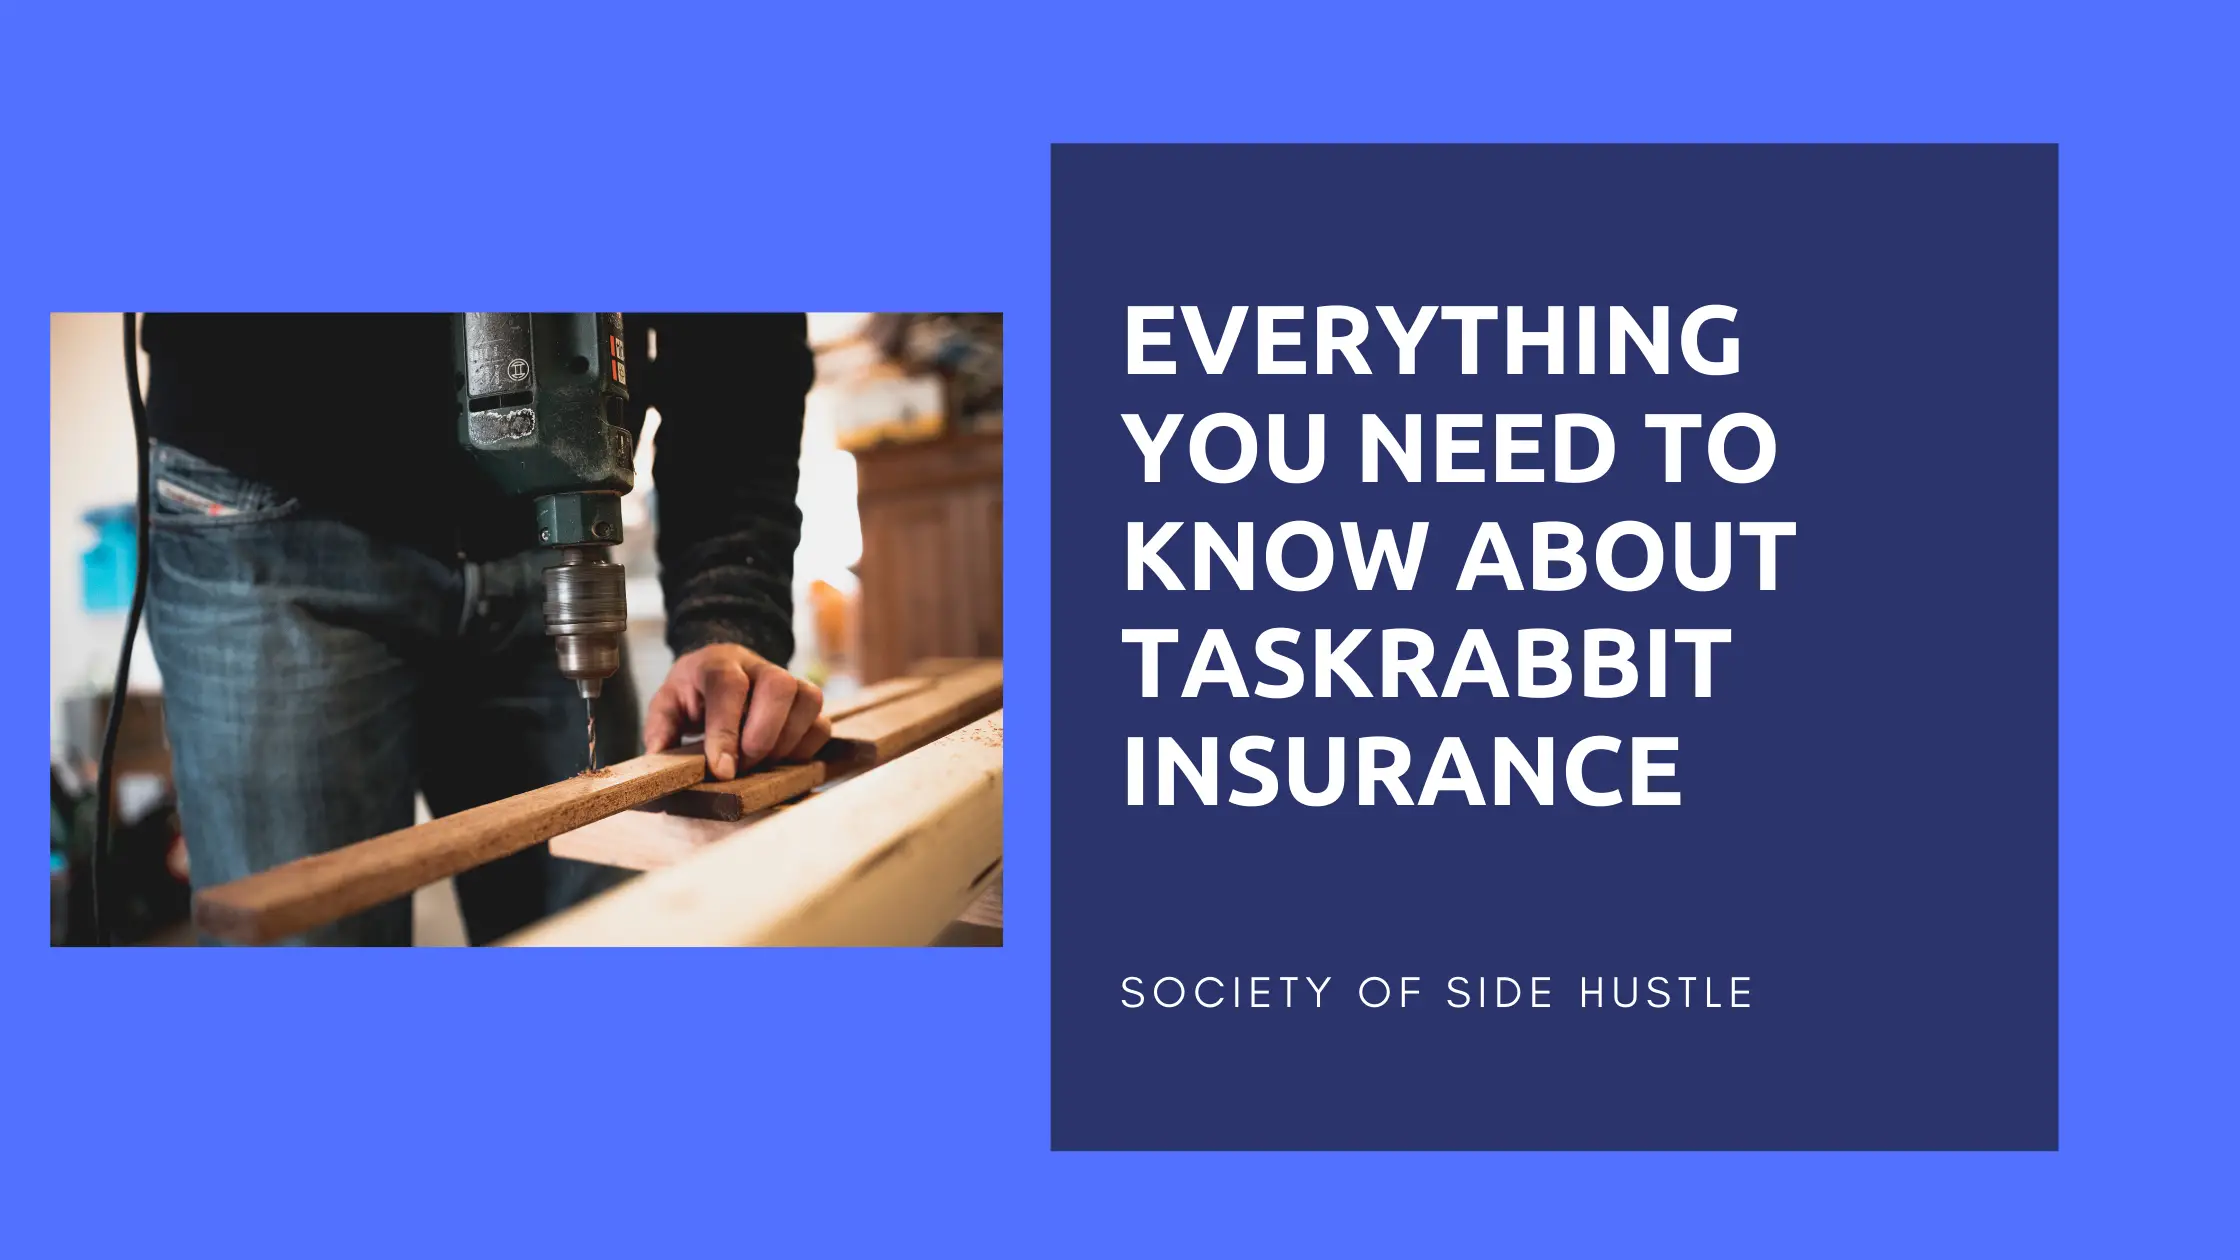 Everything You Need to Know About TaskRabbit Insurance: The Basics